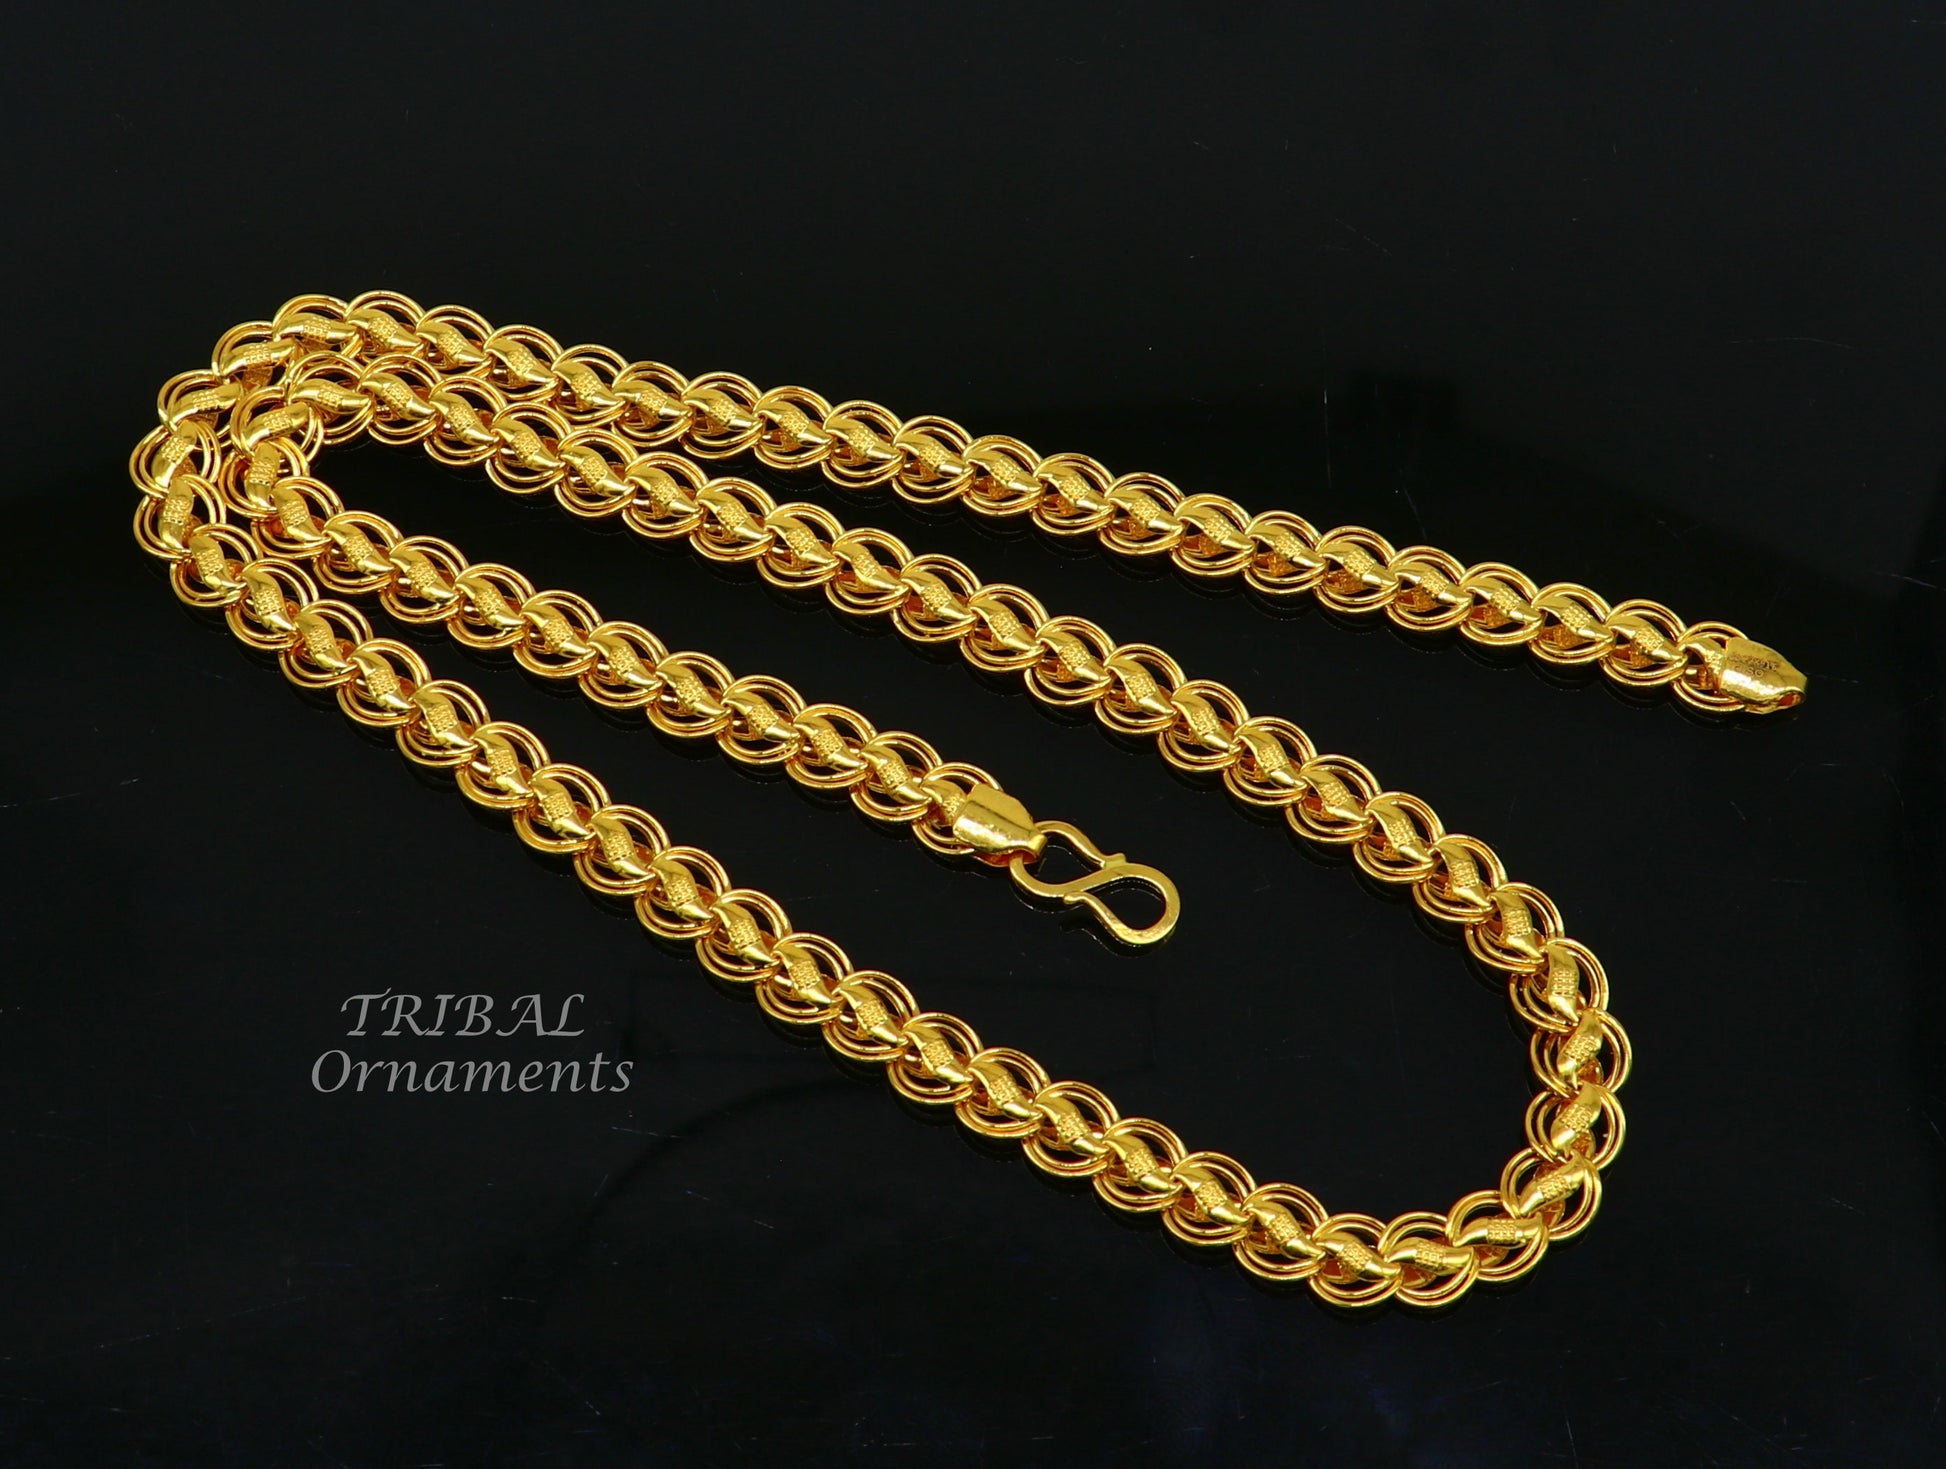 22k yellow gold handmade fabulous Lotus chain necklace excellent gold men's boy's chain certified unique handmade  gifting jewelry ch570 - TRIBAL ORNAMENTS